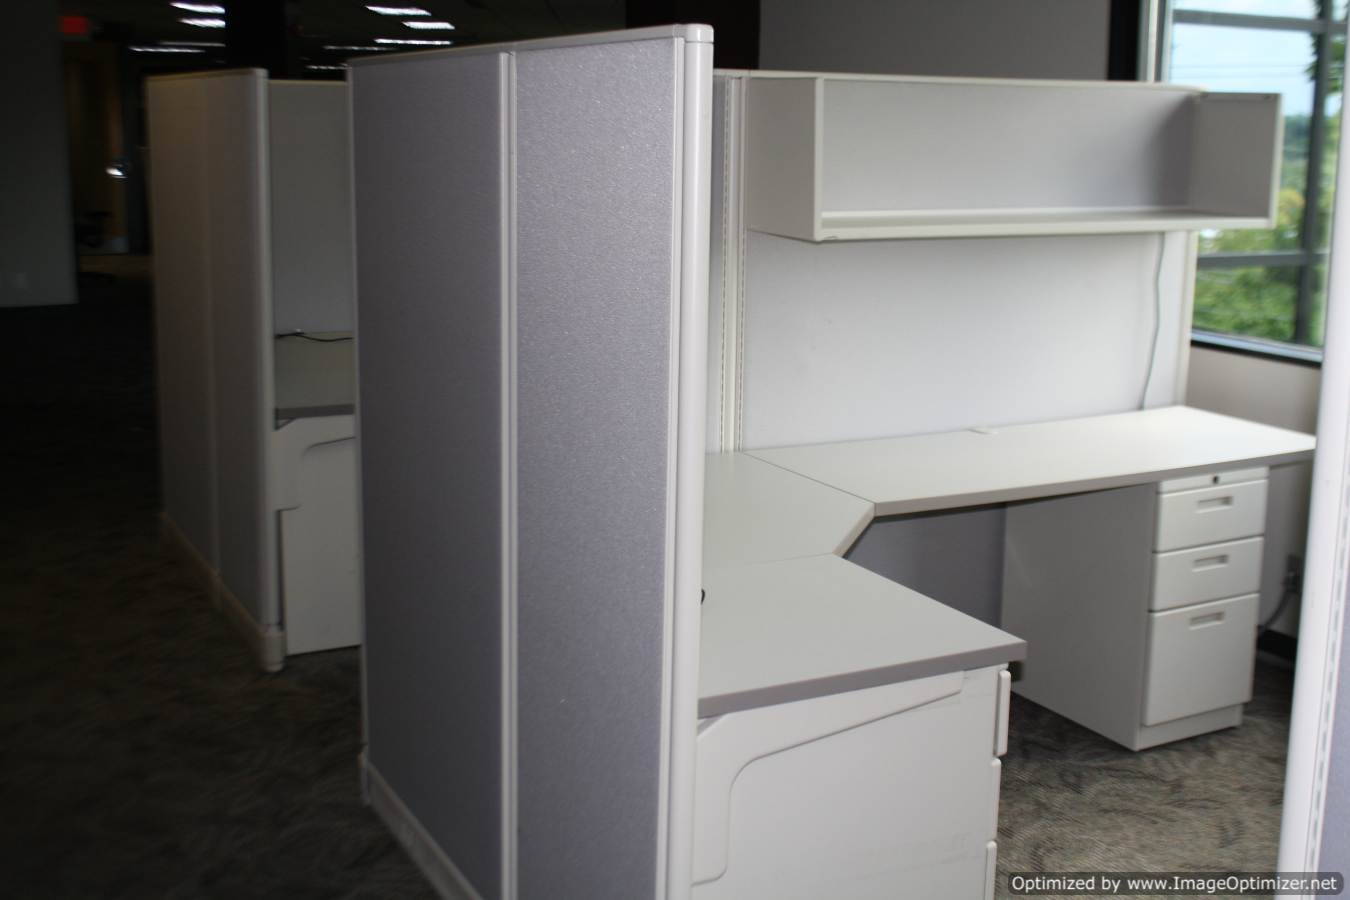 Knoll Equity Cubicles 2 